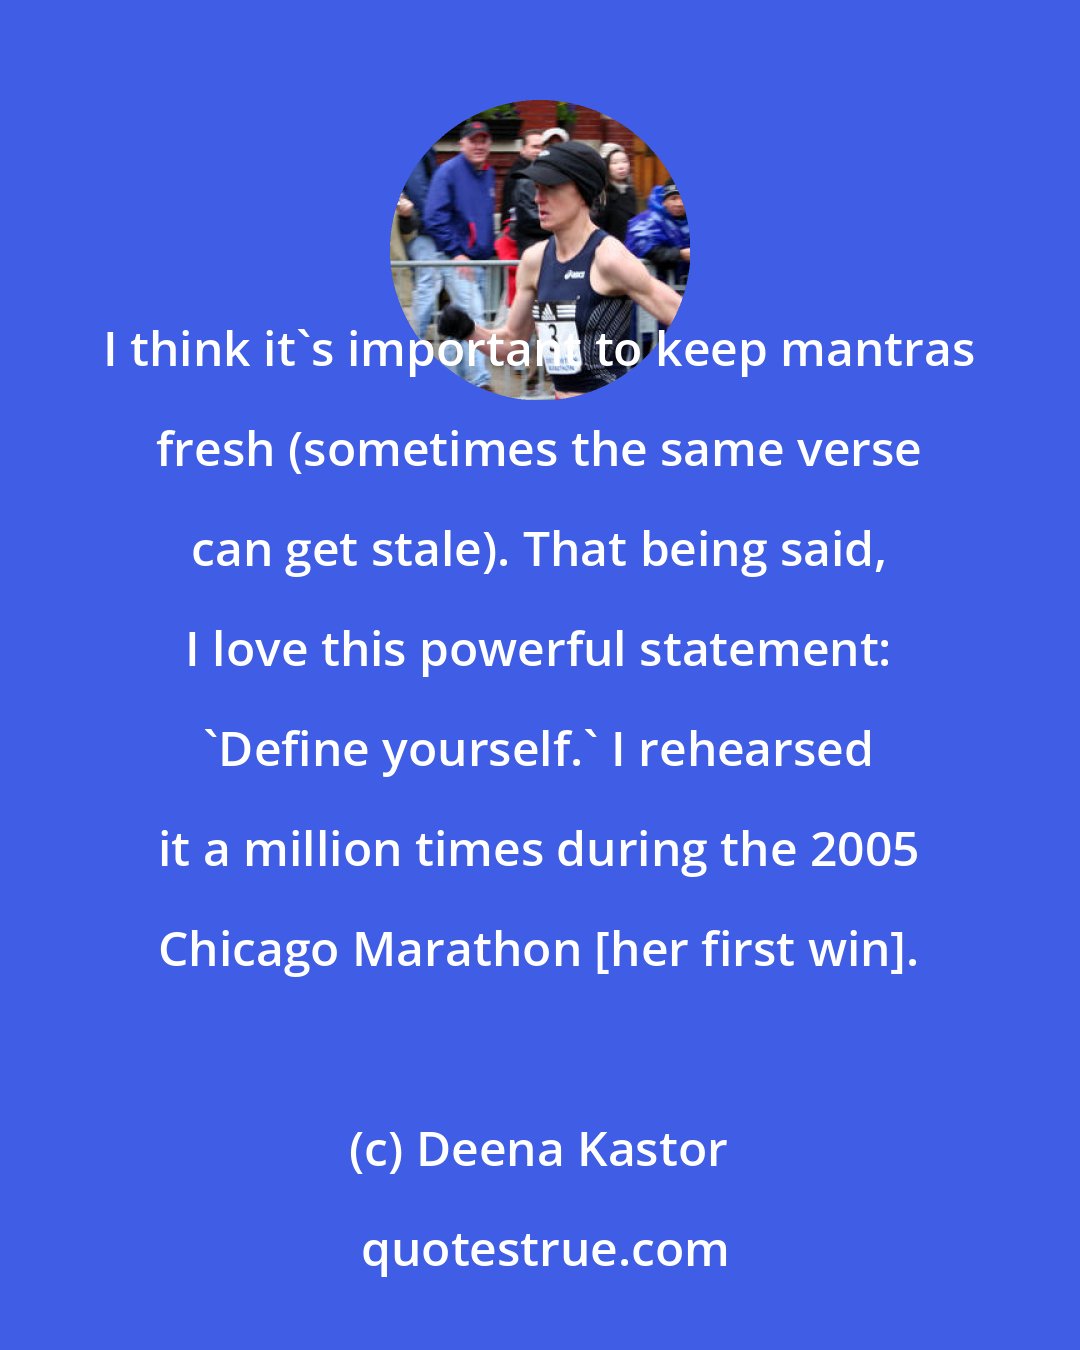 Deena Kastor: I think it's important to keep mantras fresh (sometimes the same verse can get stale). That being said, I love this powerful statement: 'Define yourself.' I rehearsed it a million times during the 2005 Chicago Marathon [her first win].